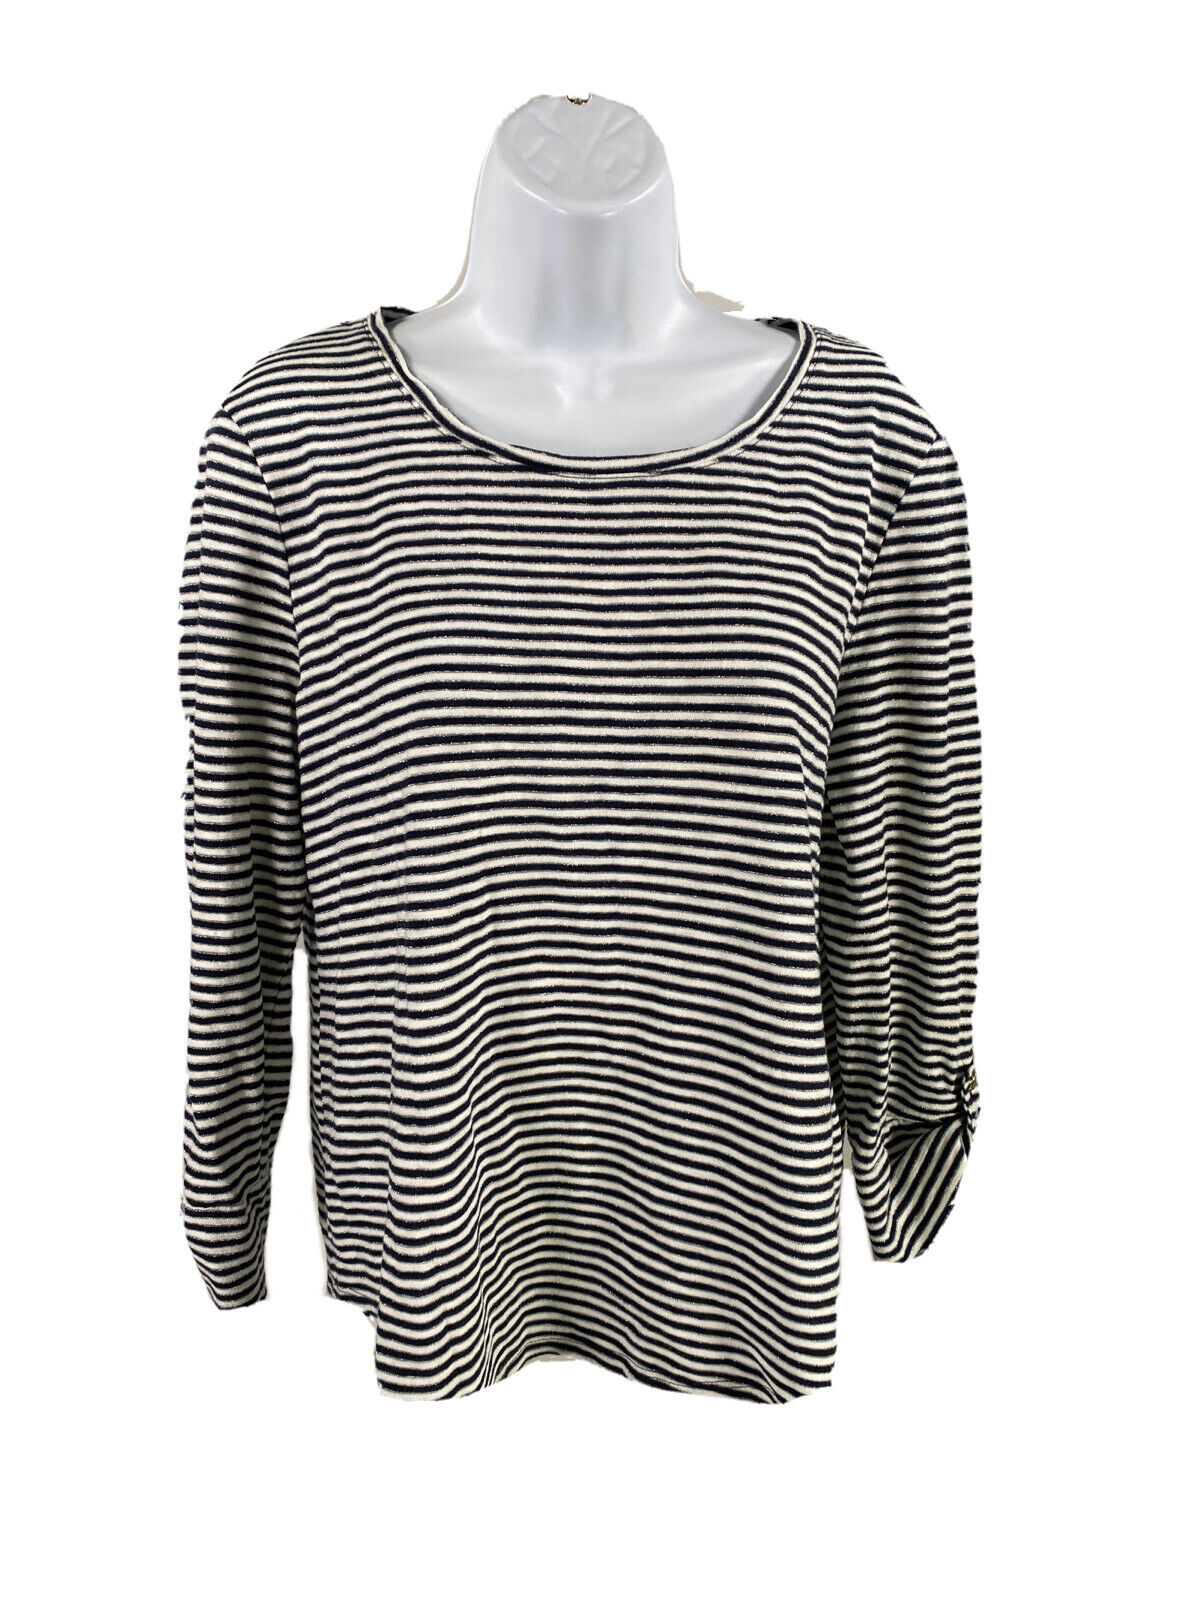 Chico's Women's Blue/Silver Striped 3/4 Sleeve Ultimate Tee Shirt Sz 1/M